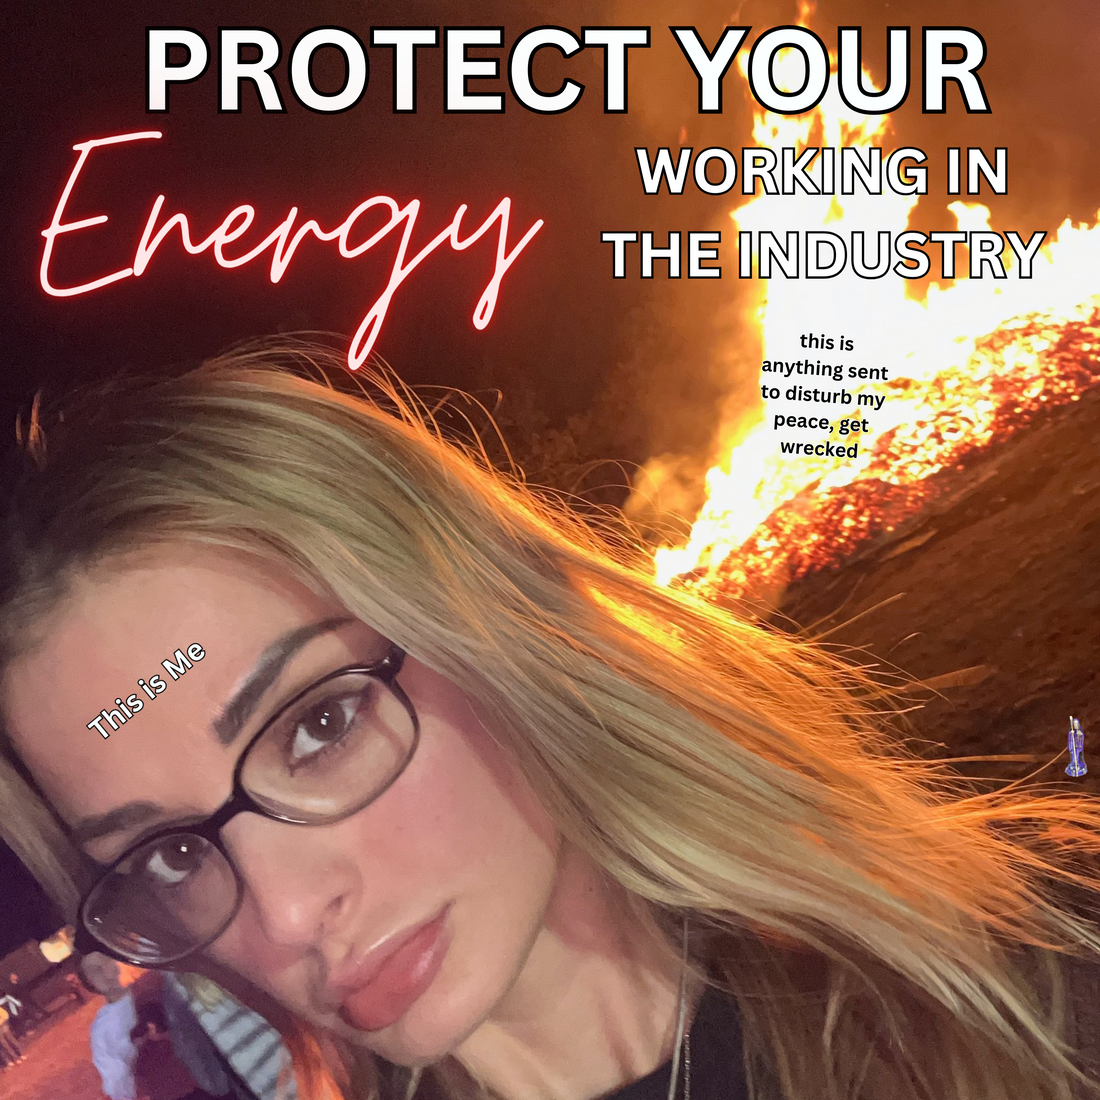 Protecting Your Peace and Energy while in The Industry: some thoughts :)